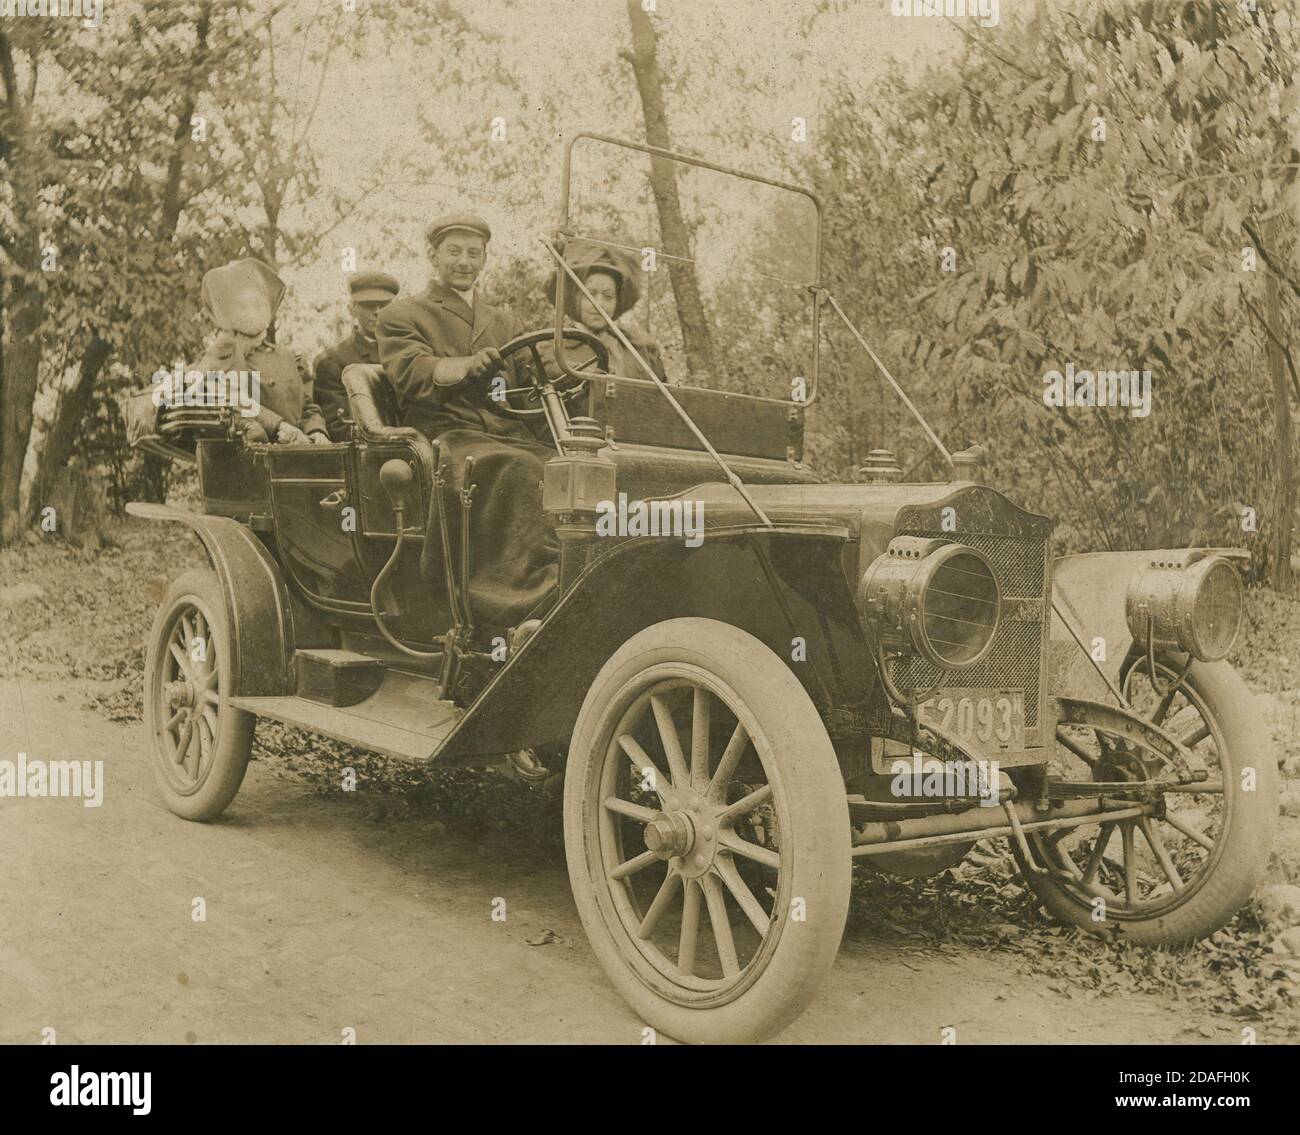 Antique c1910 photograph. The car appears to be a Maxwell Model Q, with a first generation (1910) New York license plate. SOURCE: ORIGINAL PHOTOGRAPH Stock Photo